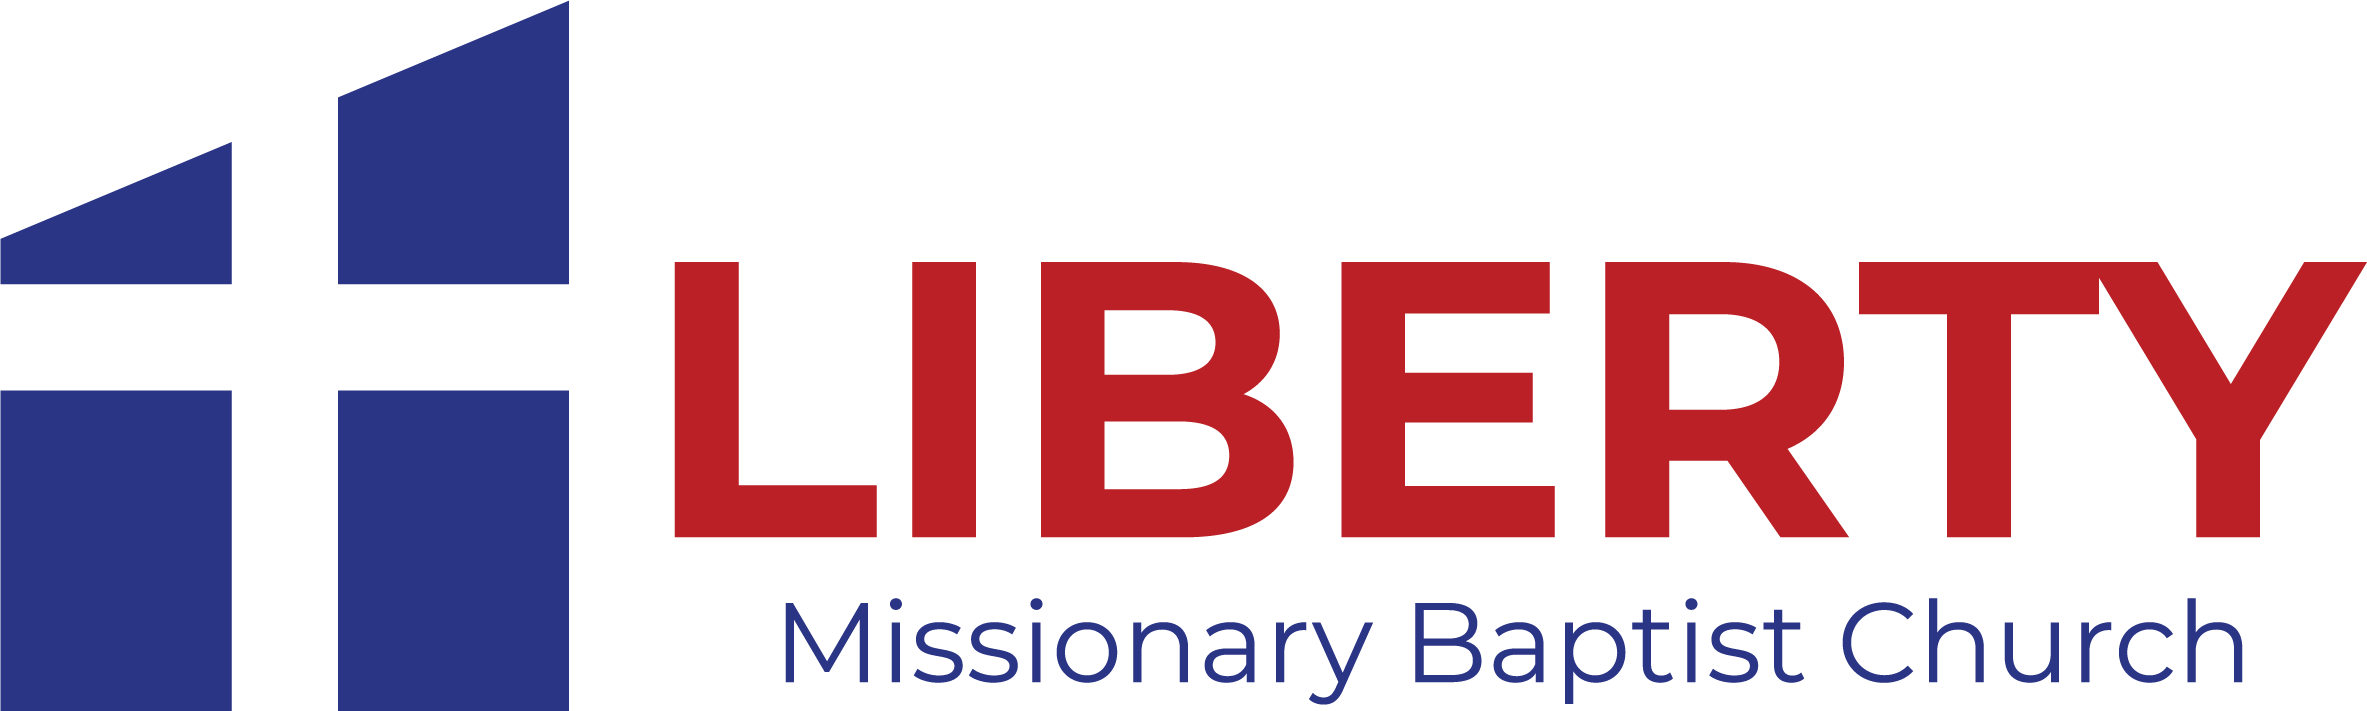 Liberty Missionary Baptist Church of Mesquite Texas